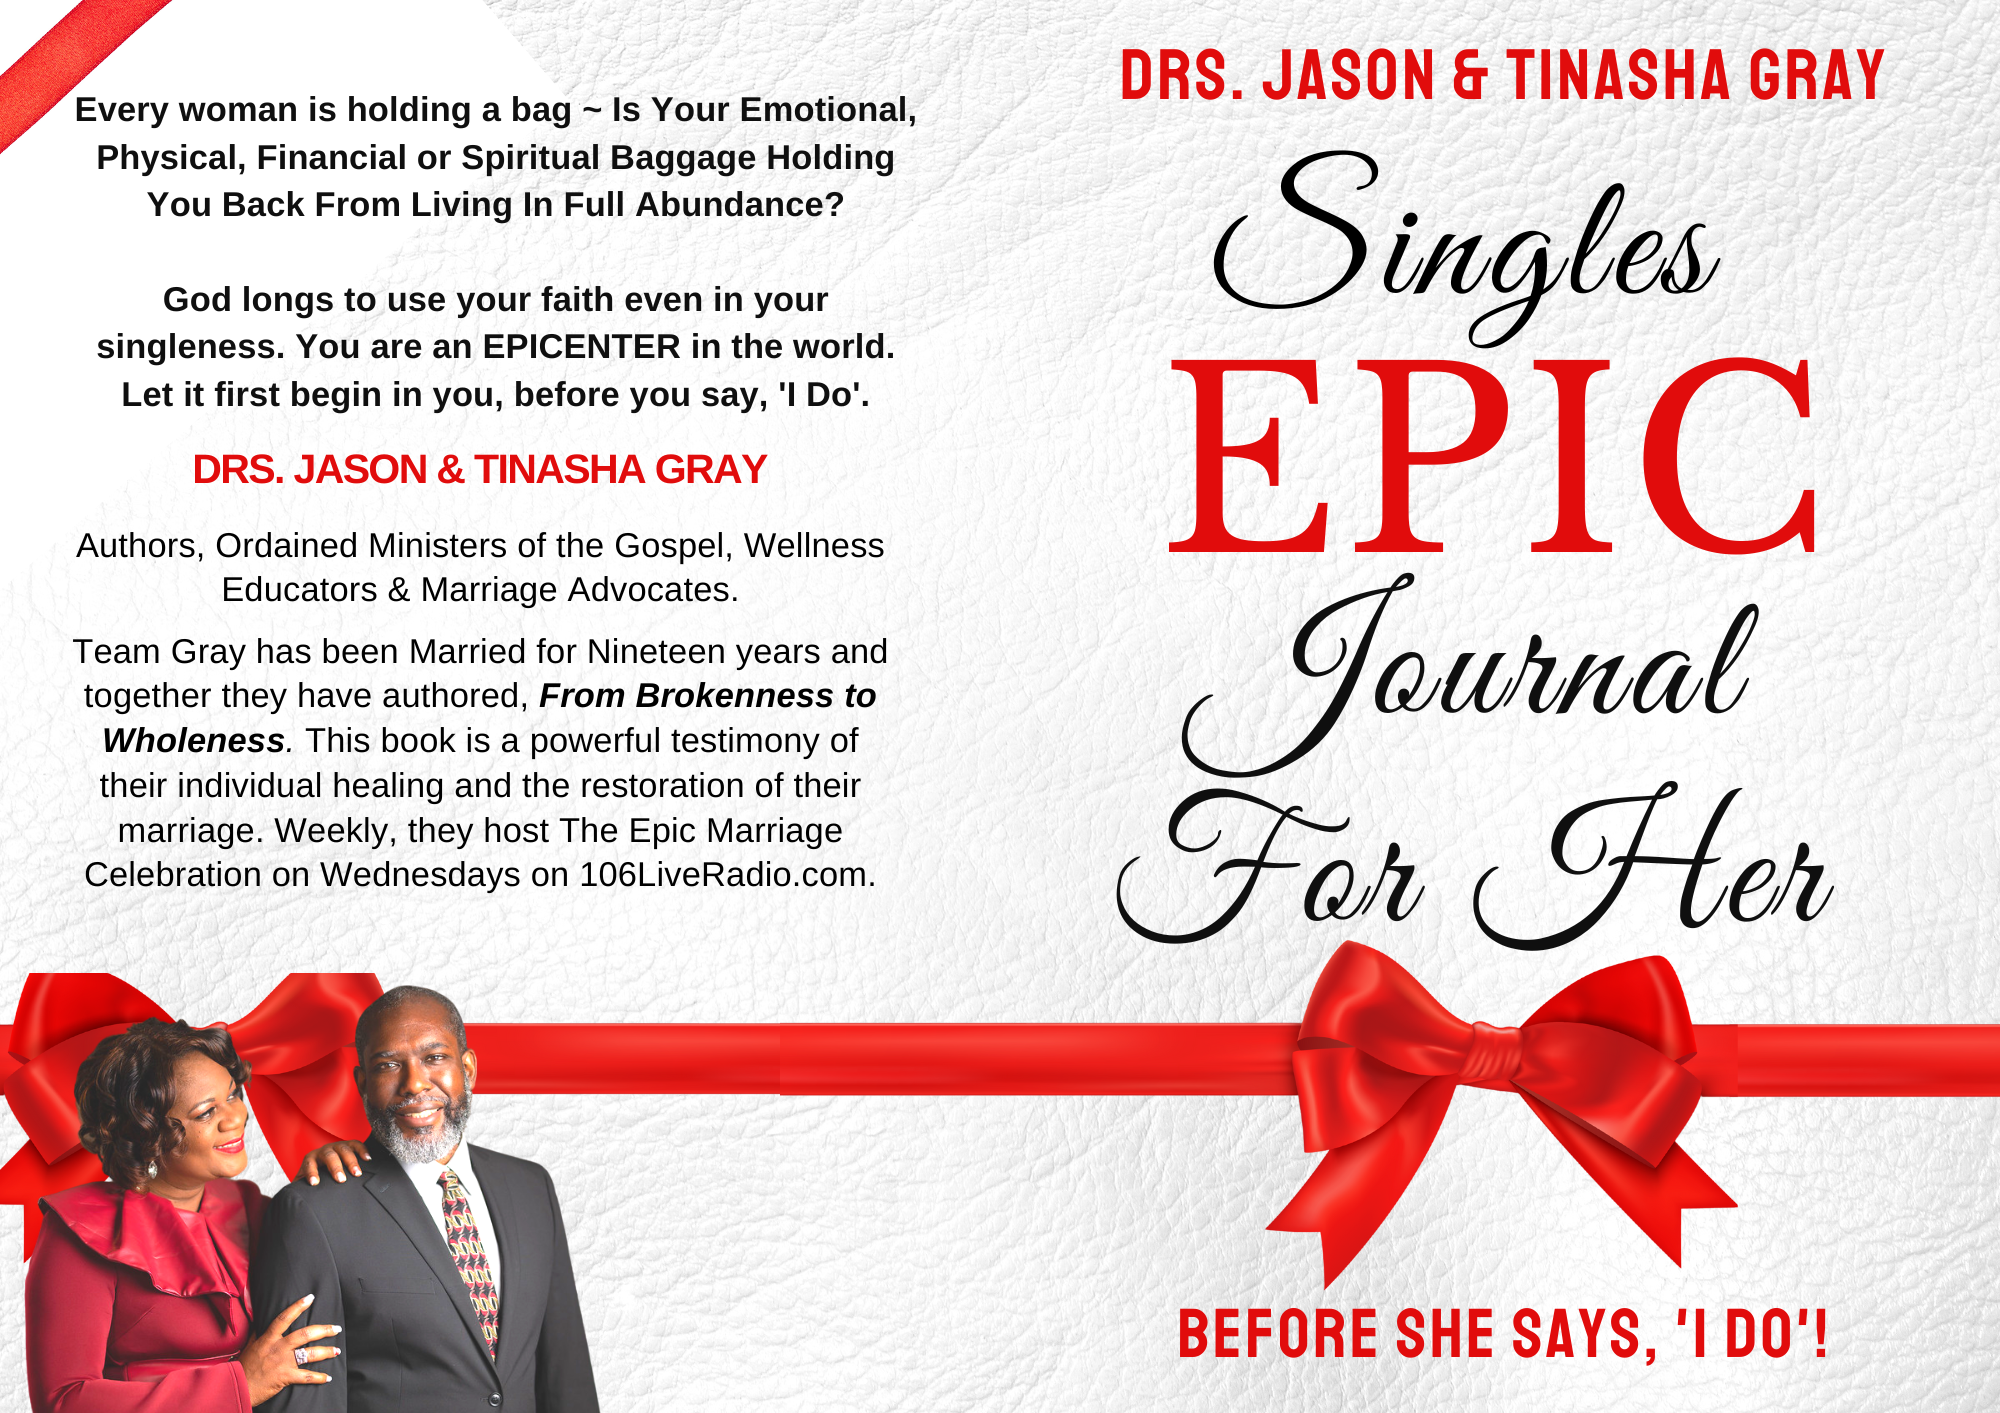 Singles EPIC Journal For Her: Before She Says, I Do!